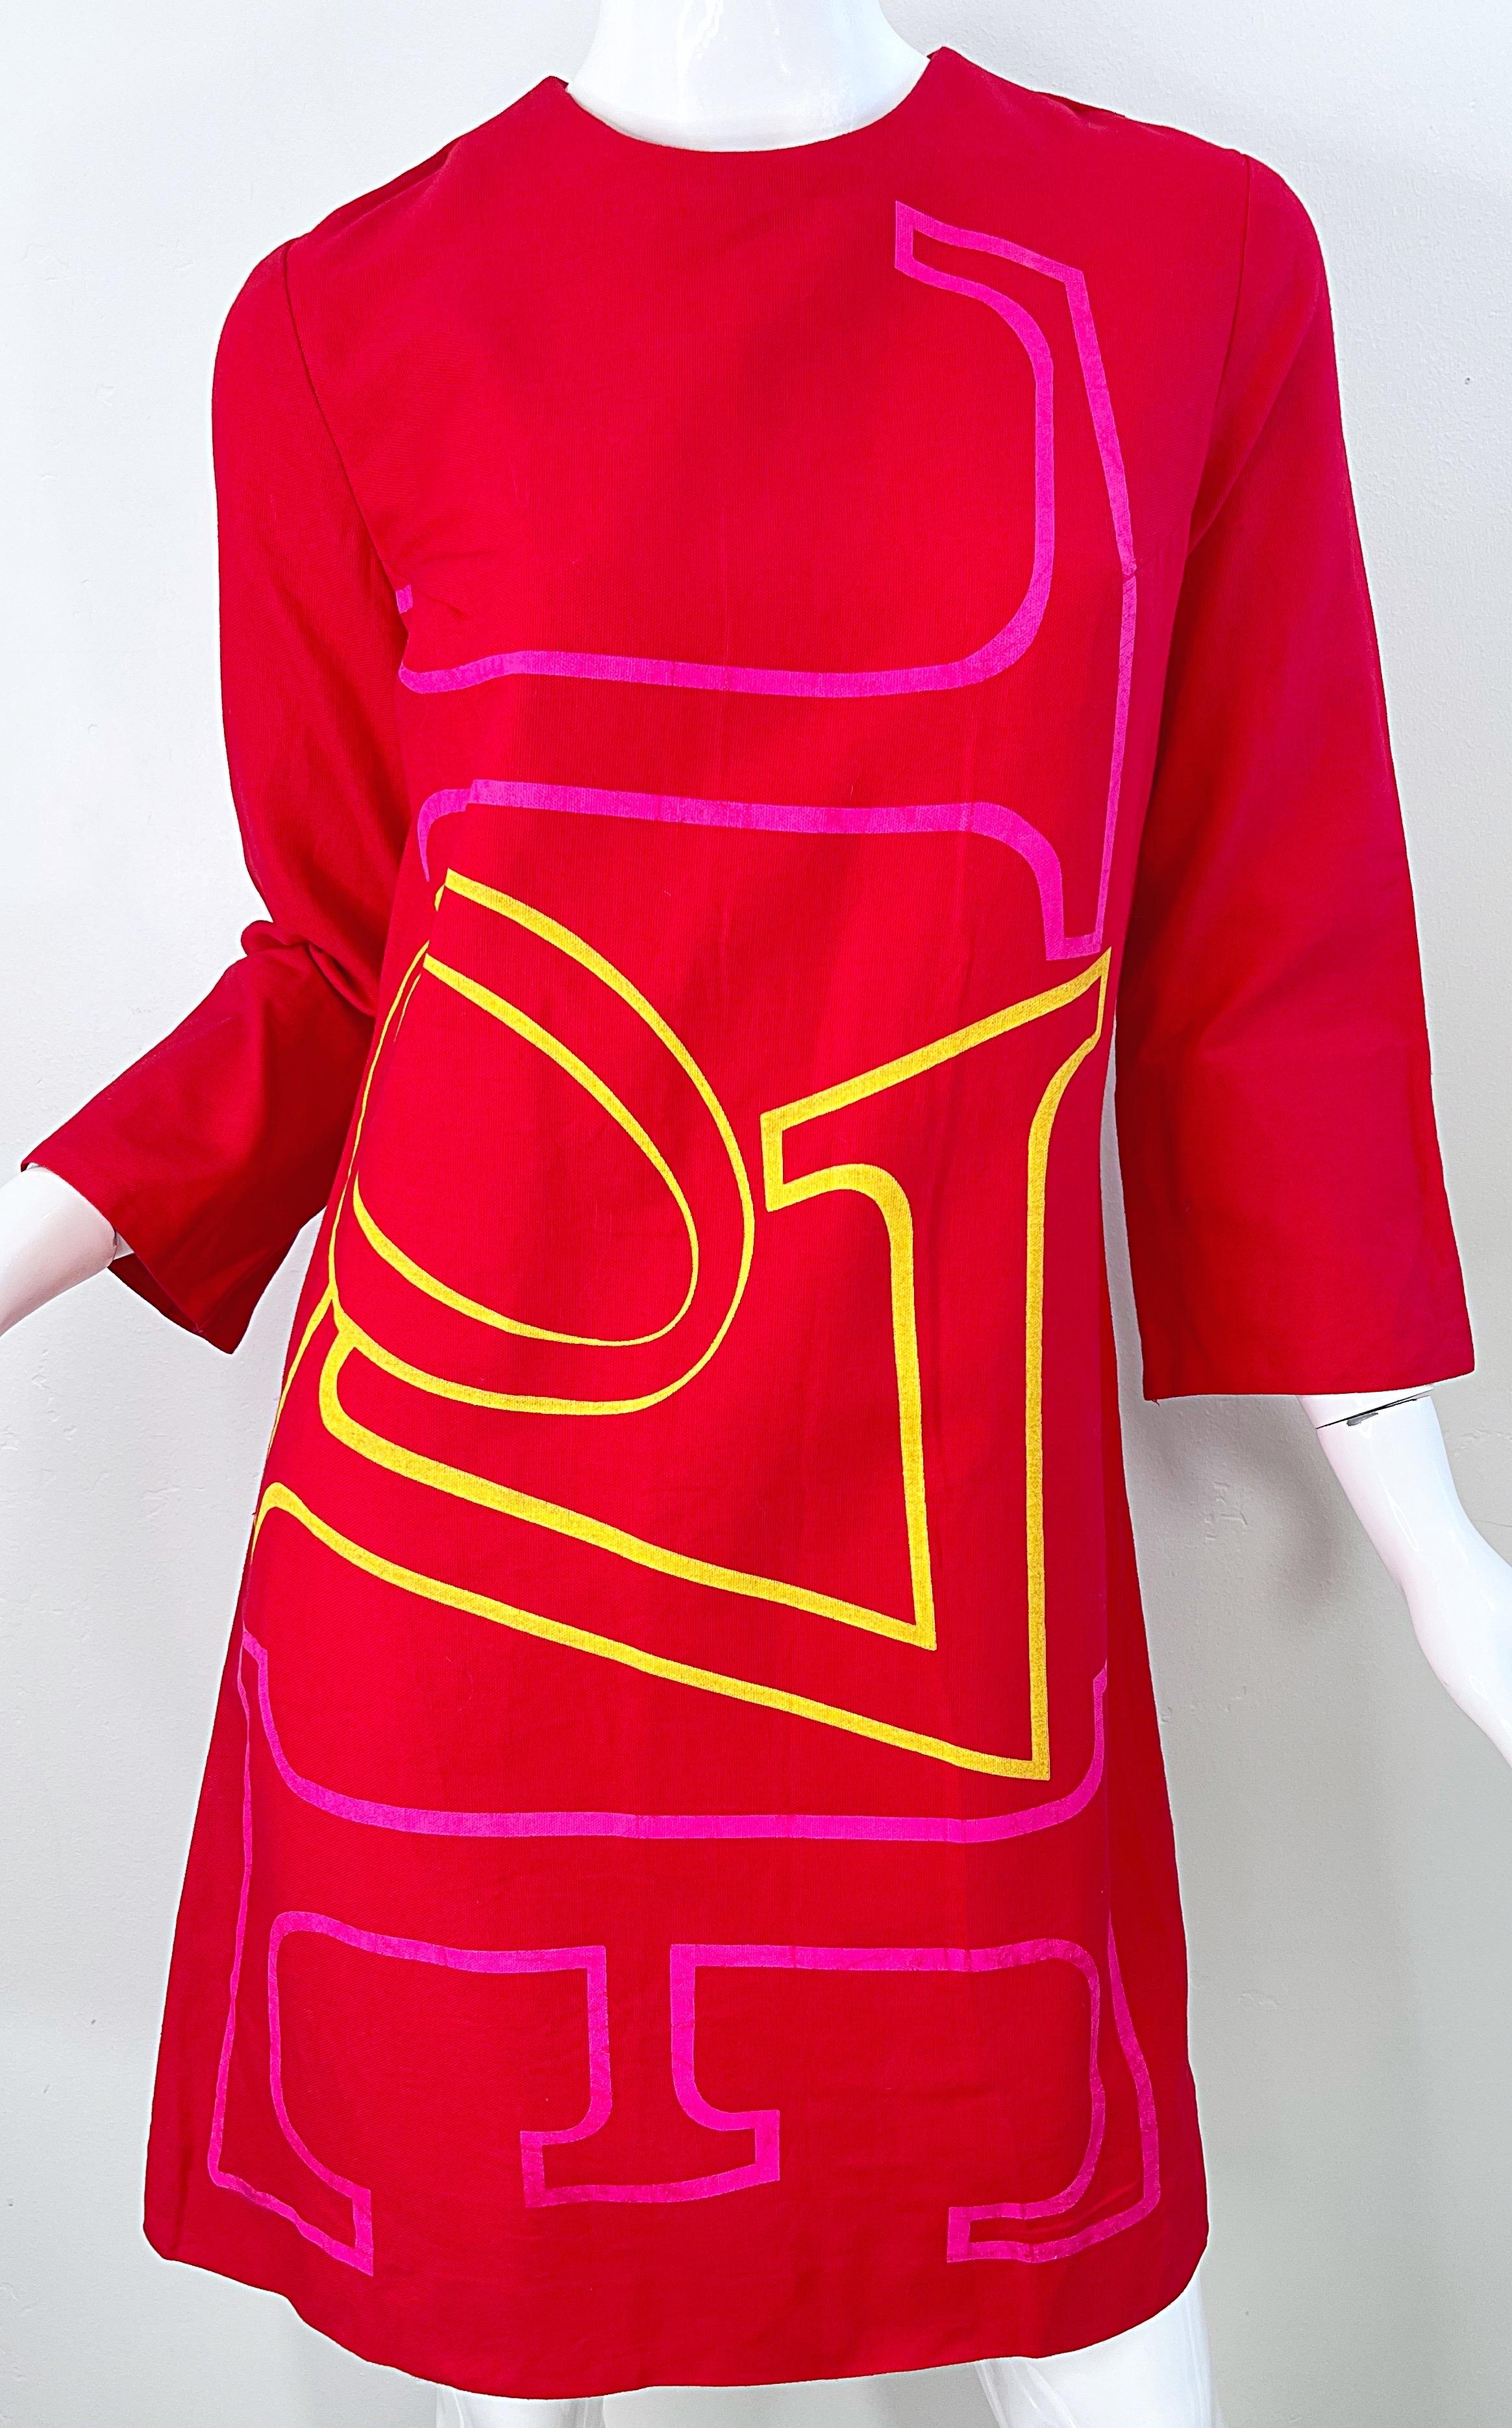 1960s Robert Indiana LOVE Hand Painted Cotton Red Vintage 60s Shift Dress For Sale 3